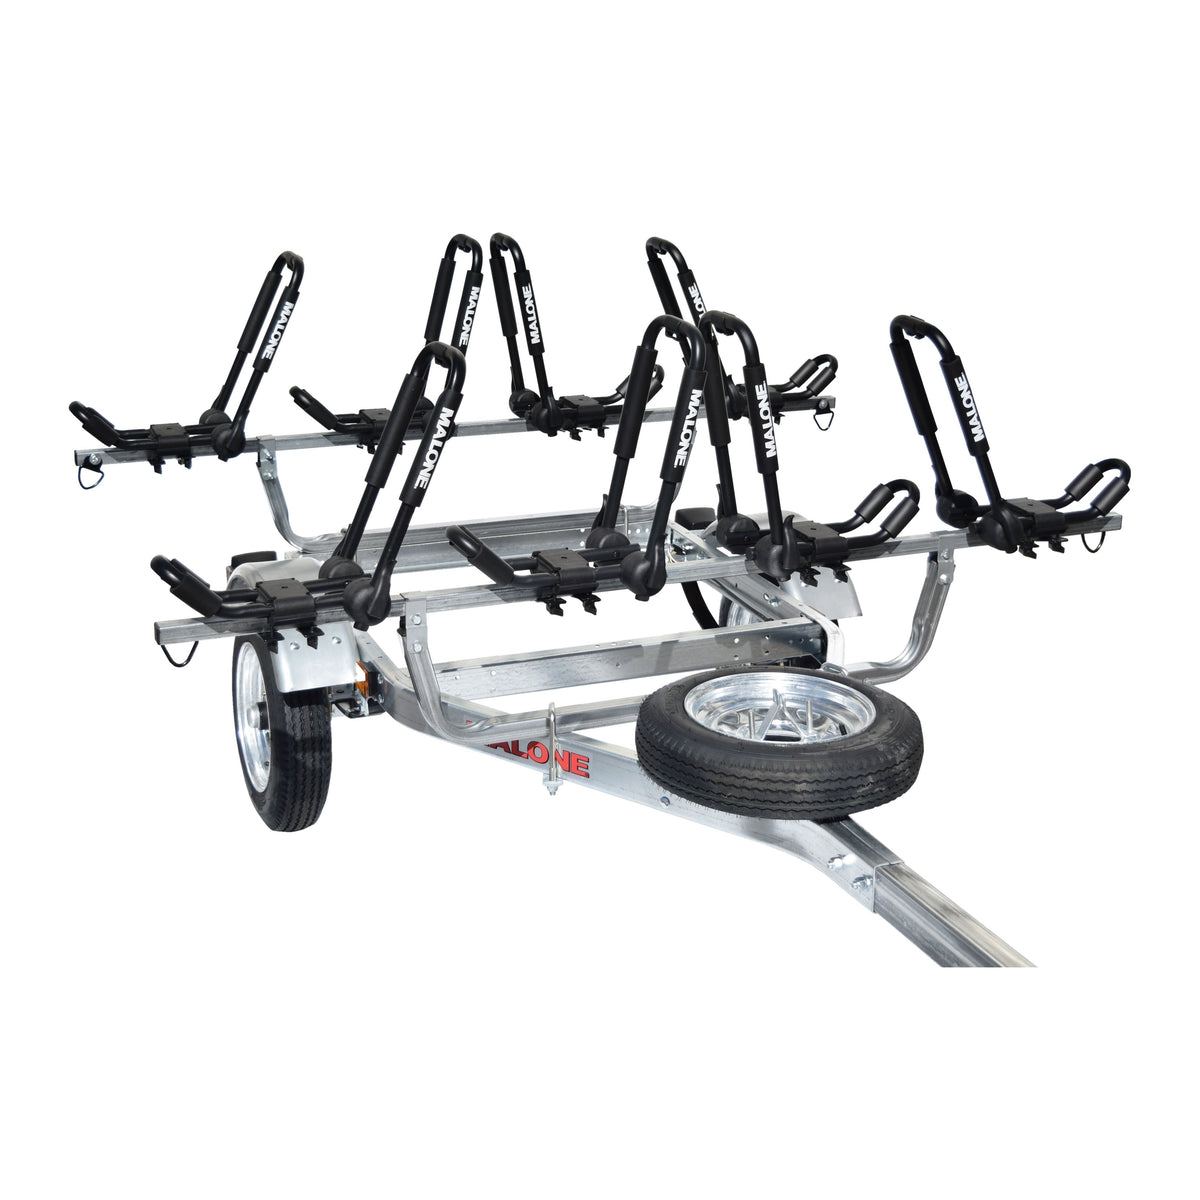 Malone MicroSport Package 1-Trailer, 1-Spare Tire Kit, 4 - J-Pro2